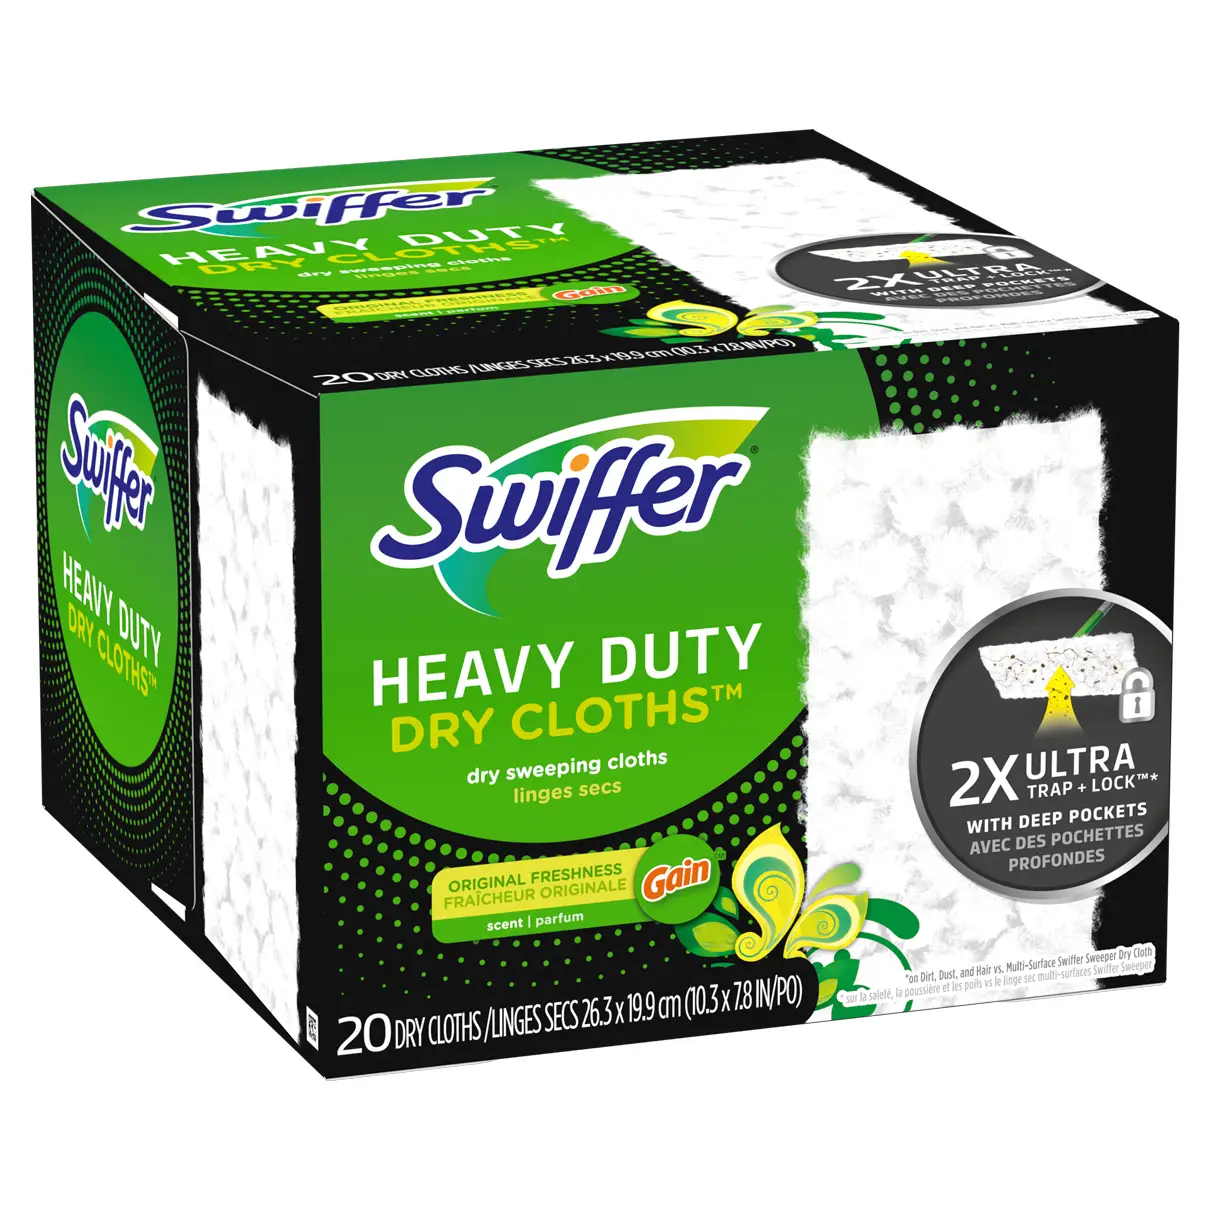 Swiffer® Sweeper™ Heavy Duty Multi-Surface Dry Cloth Refills for Floor Sweeping and Cleaning, Gain scent